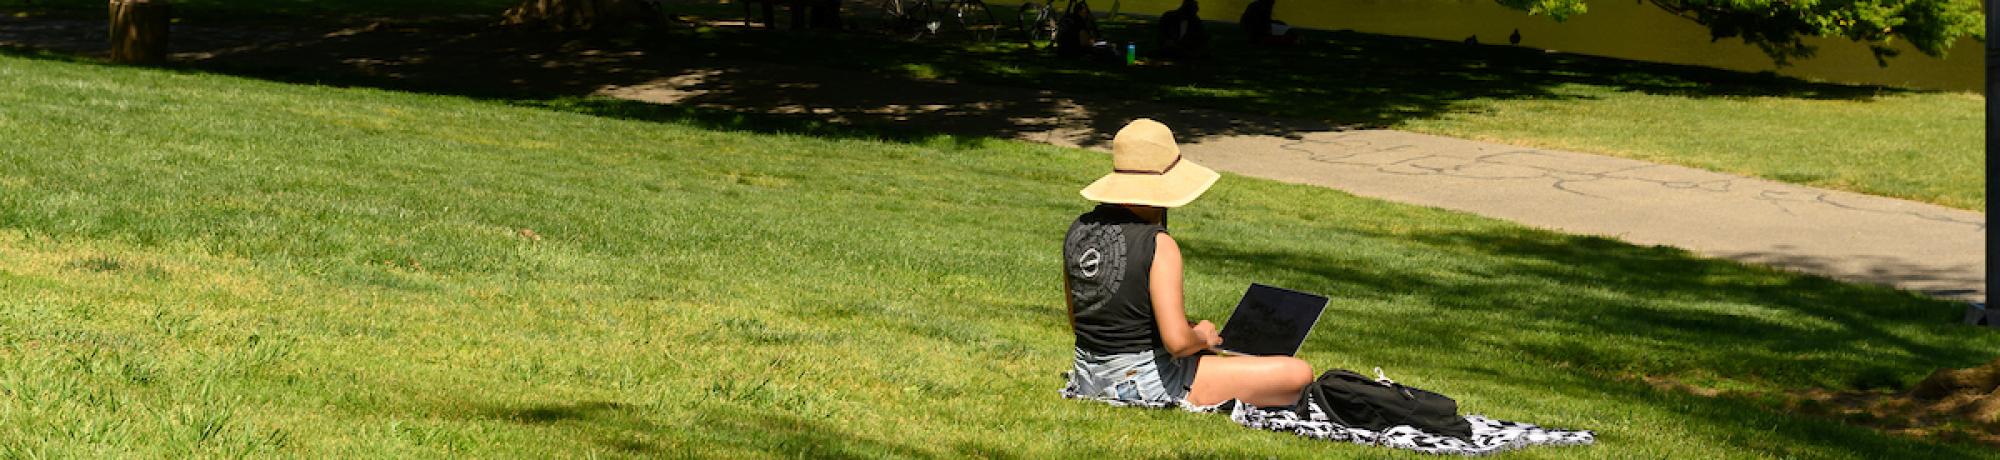 student sitting on grass with laptop